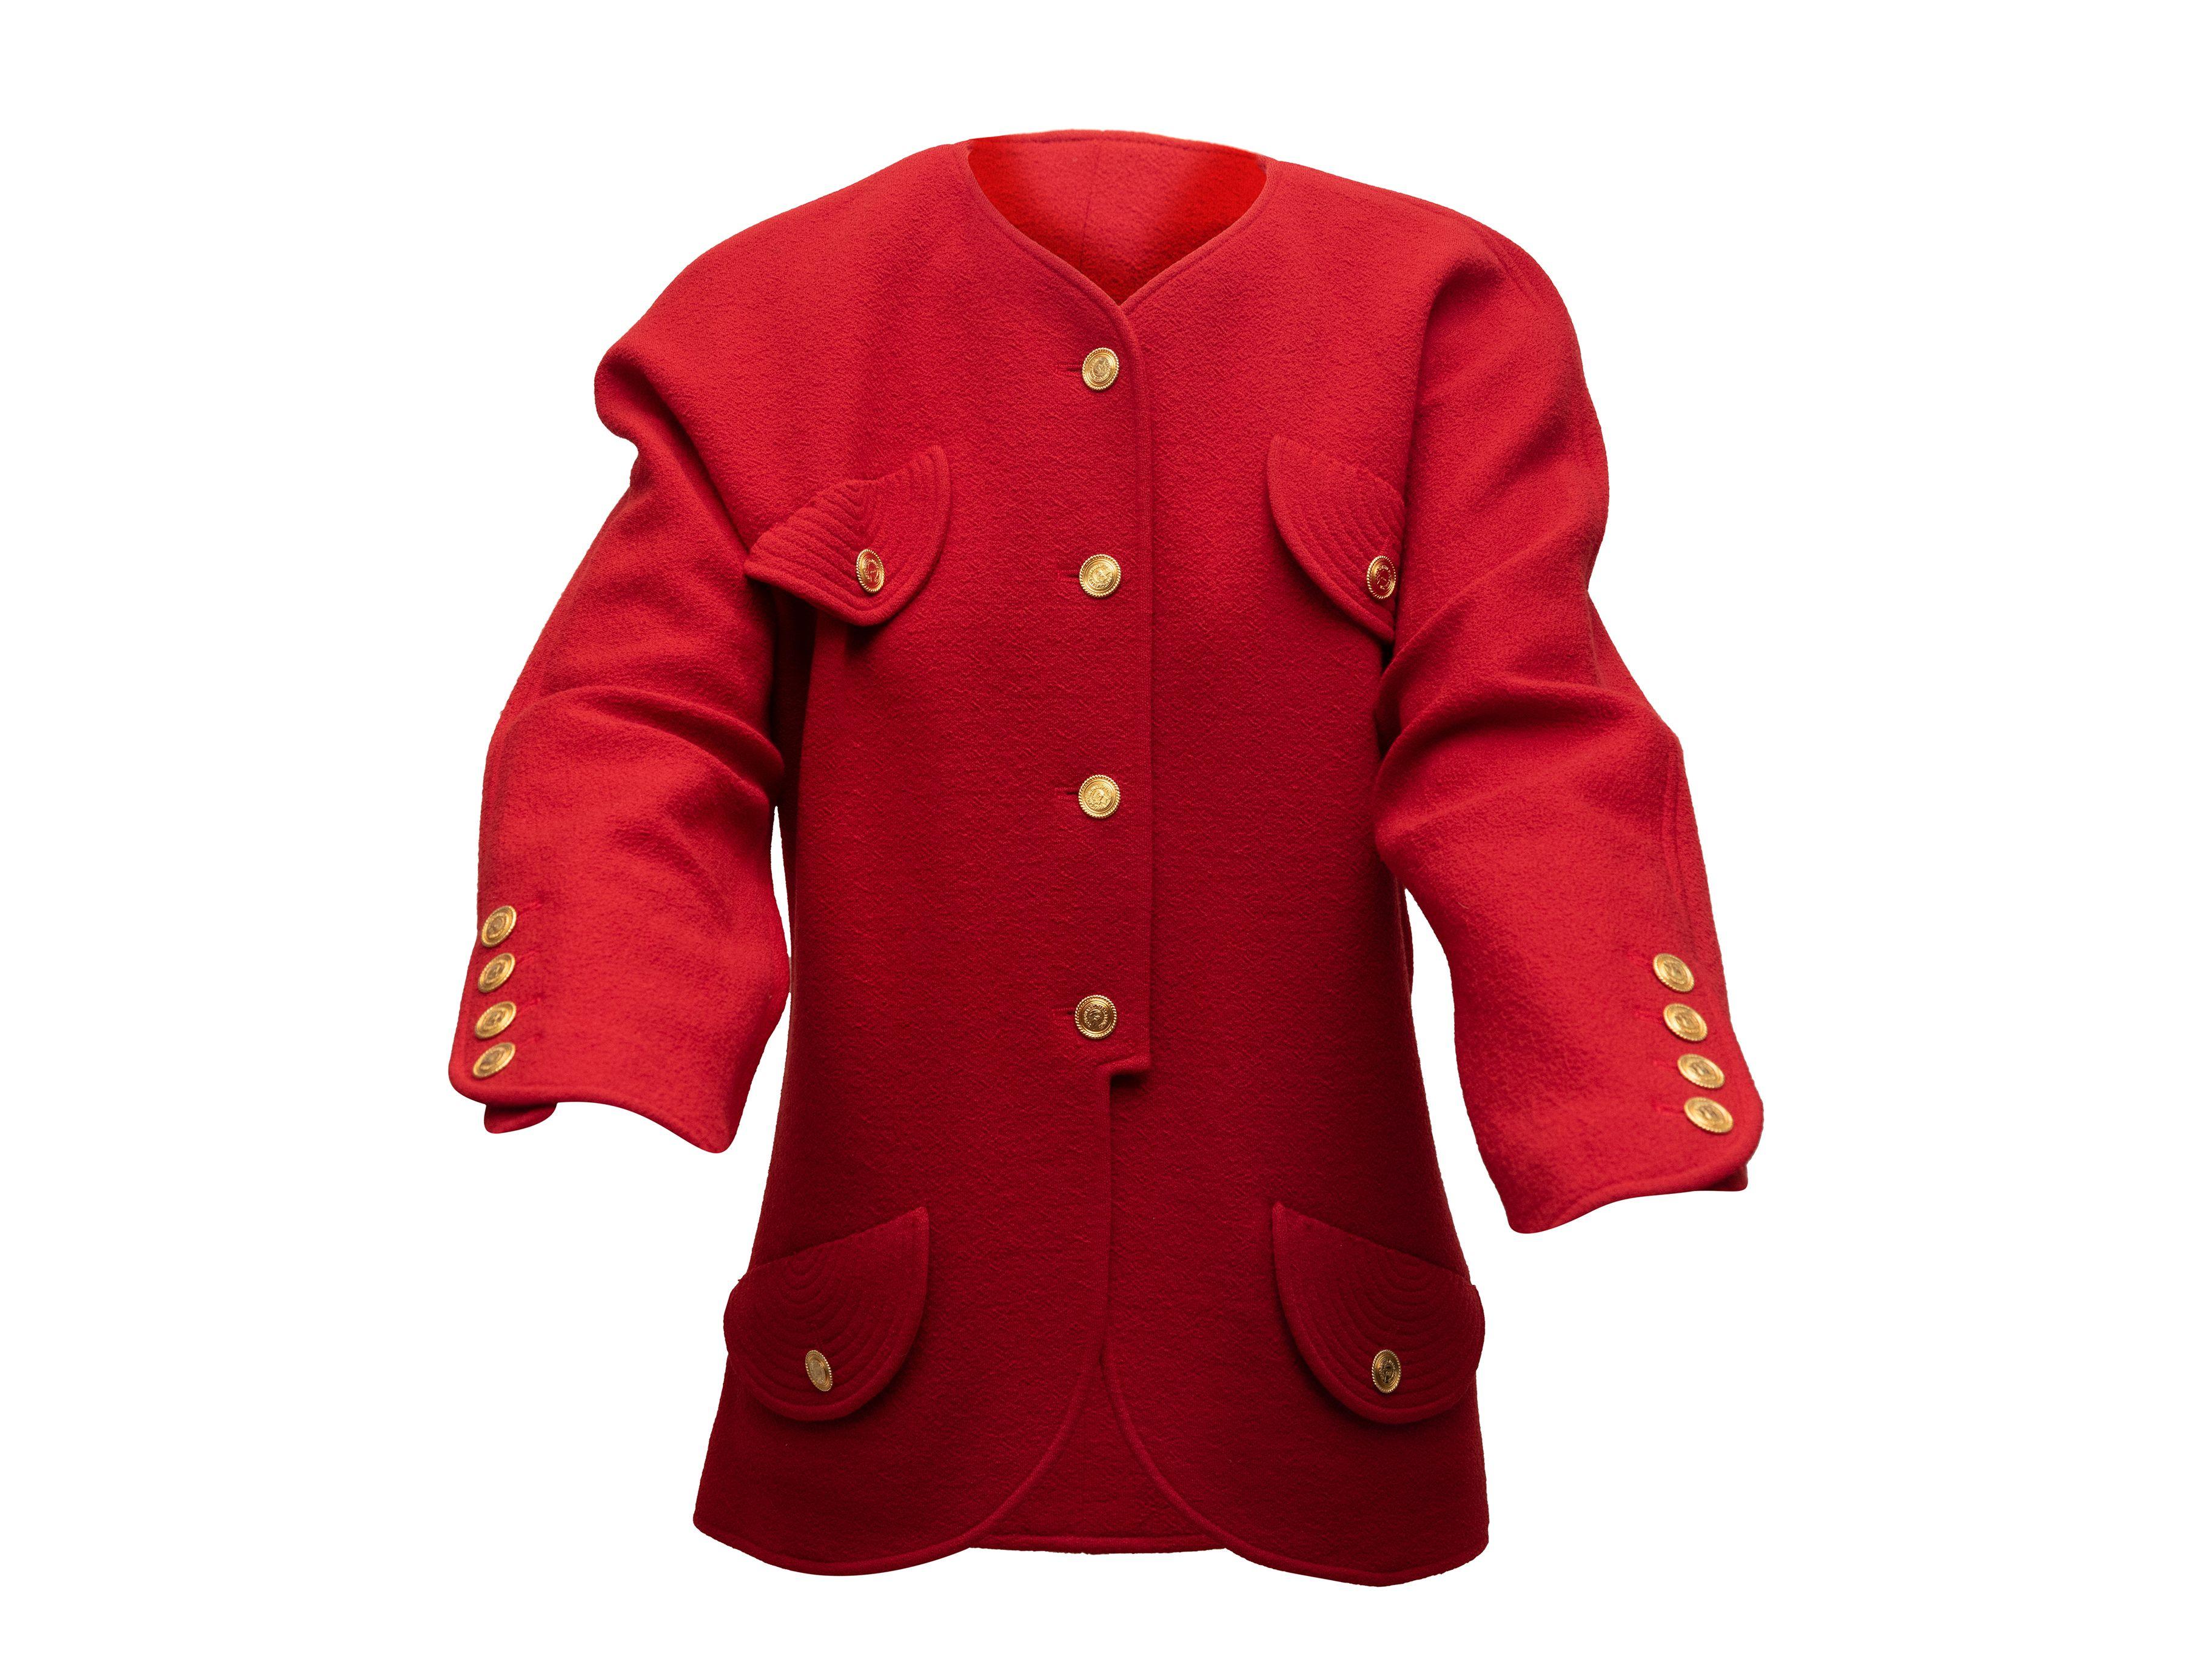 Chanel Red Boutique Wool Jacket 1